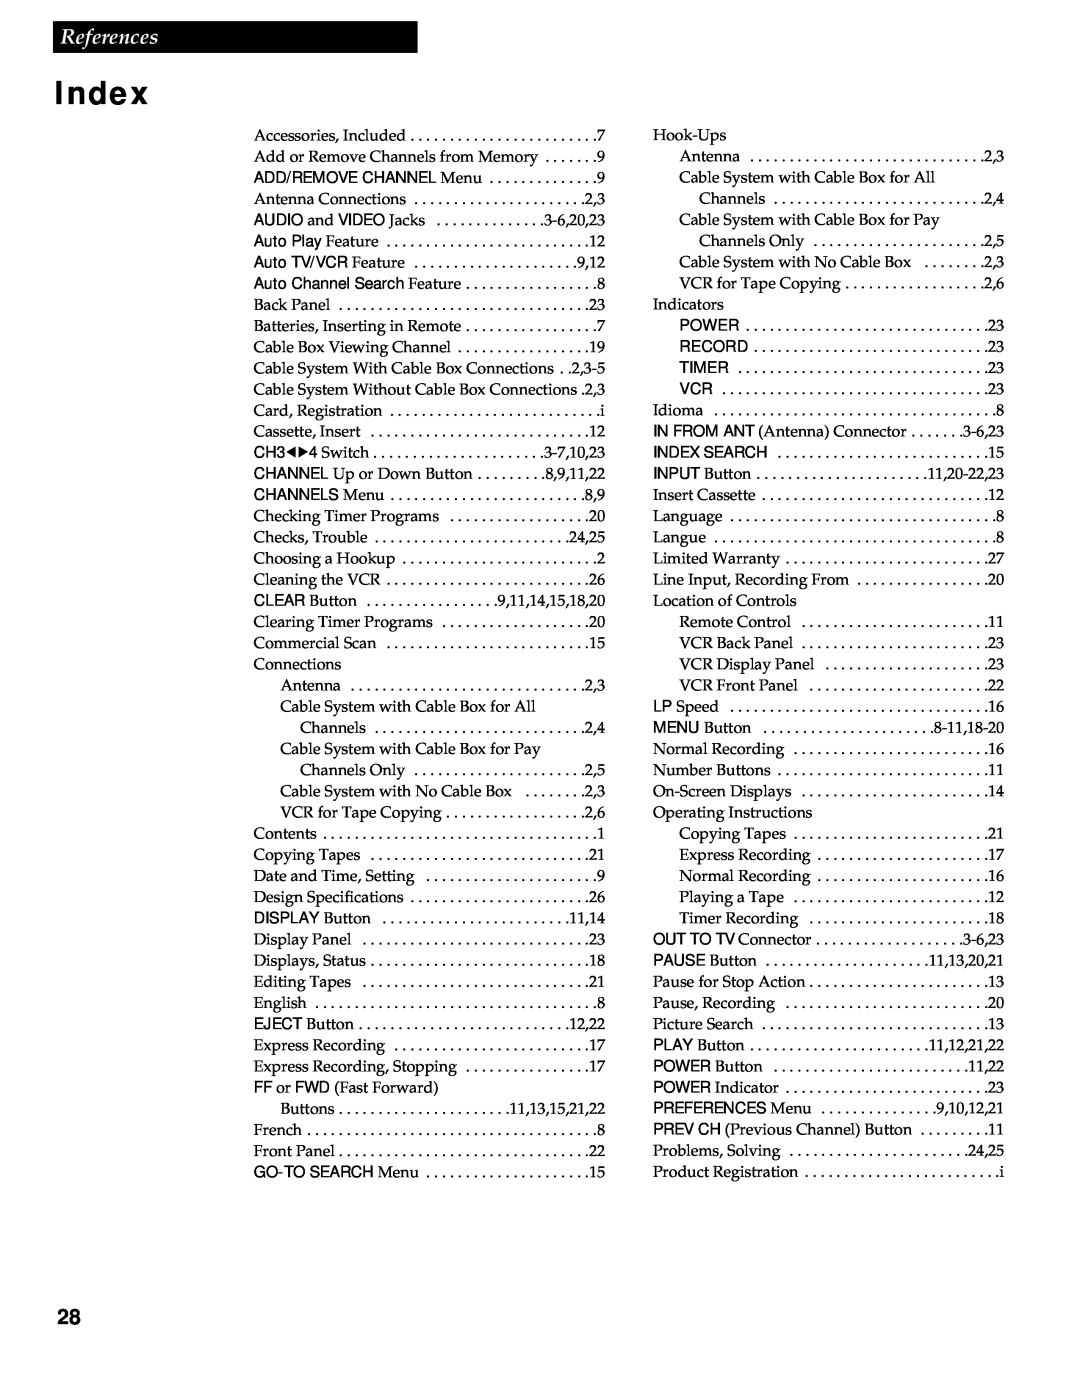 RCA VR336 manual Index, References 